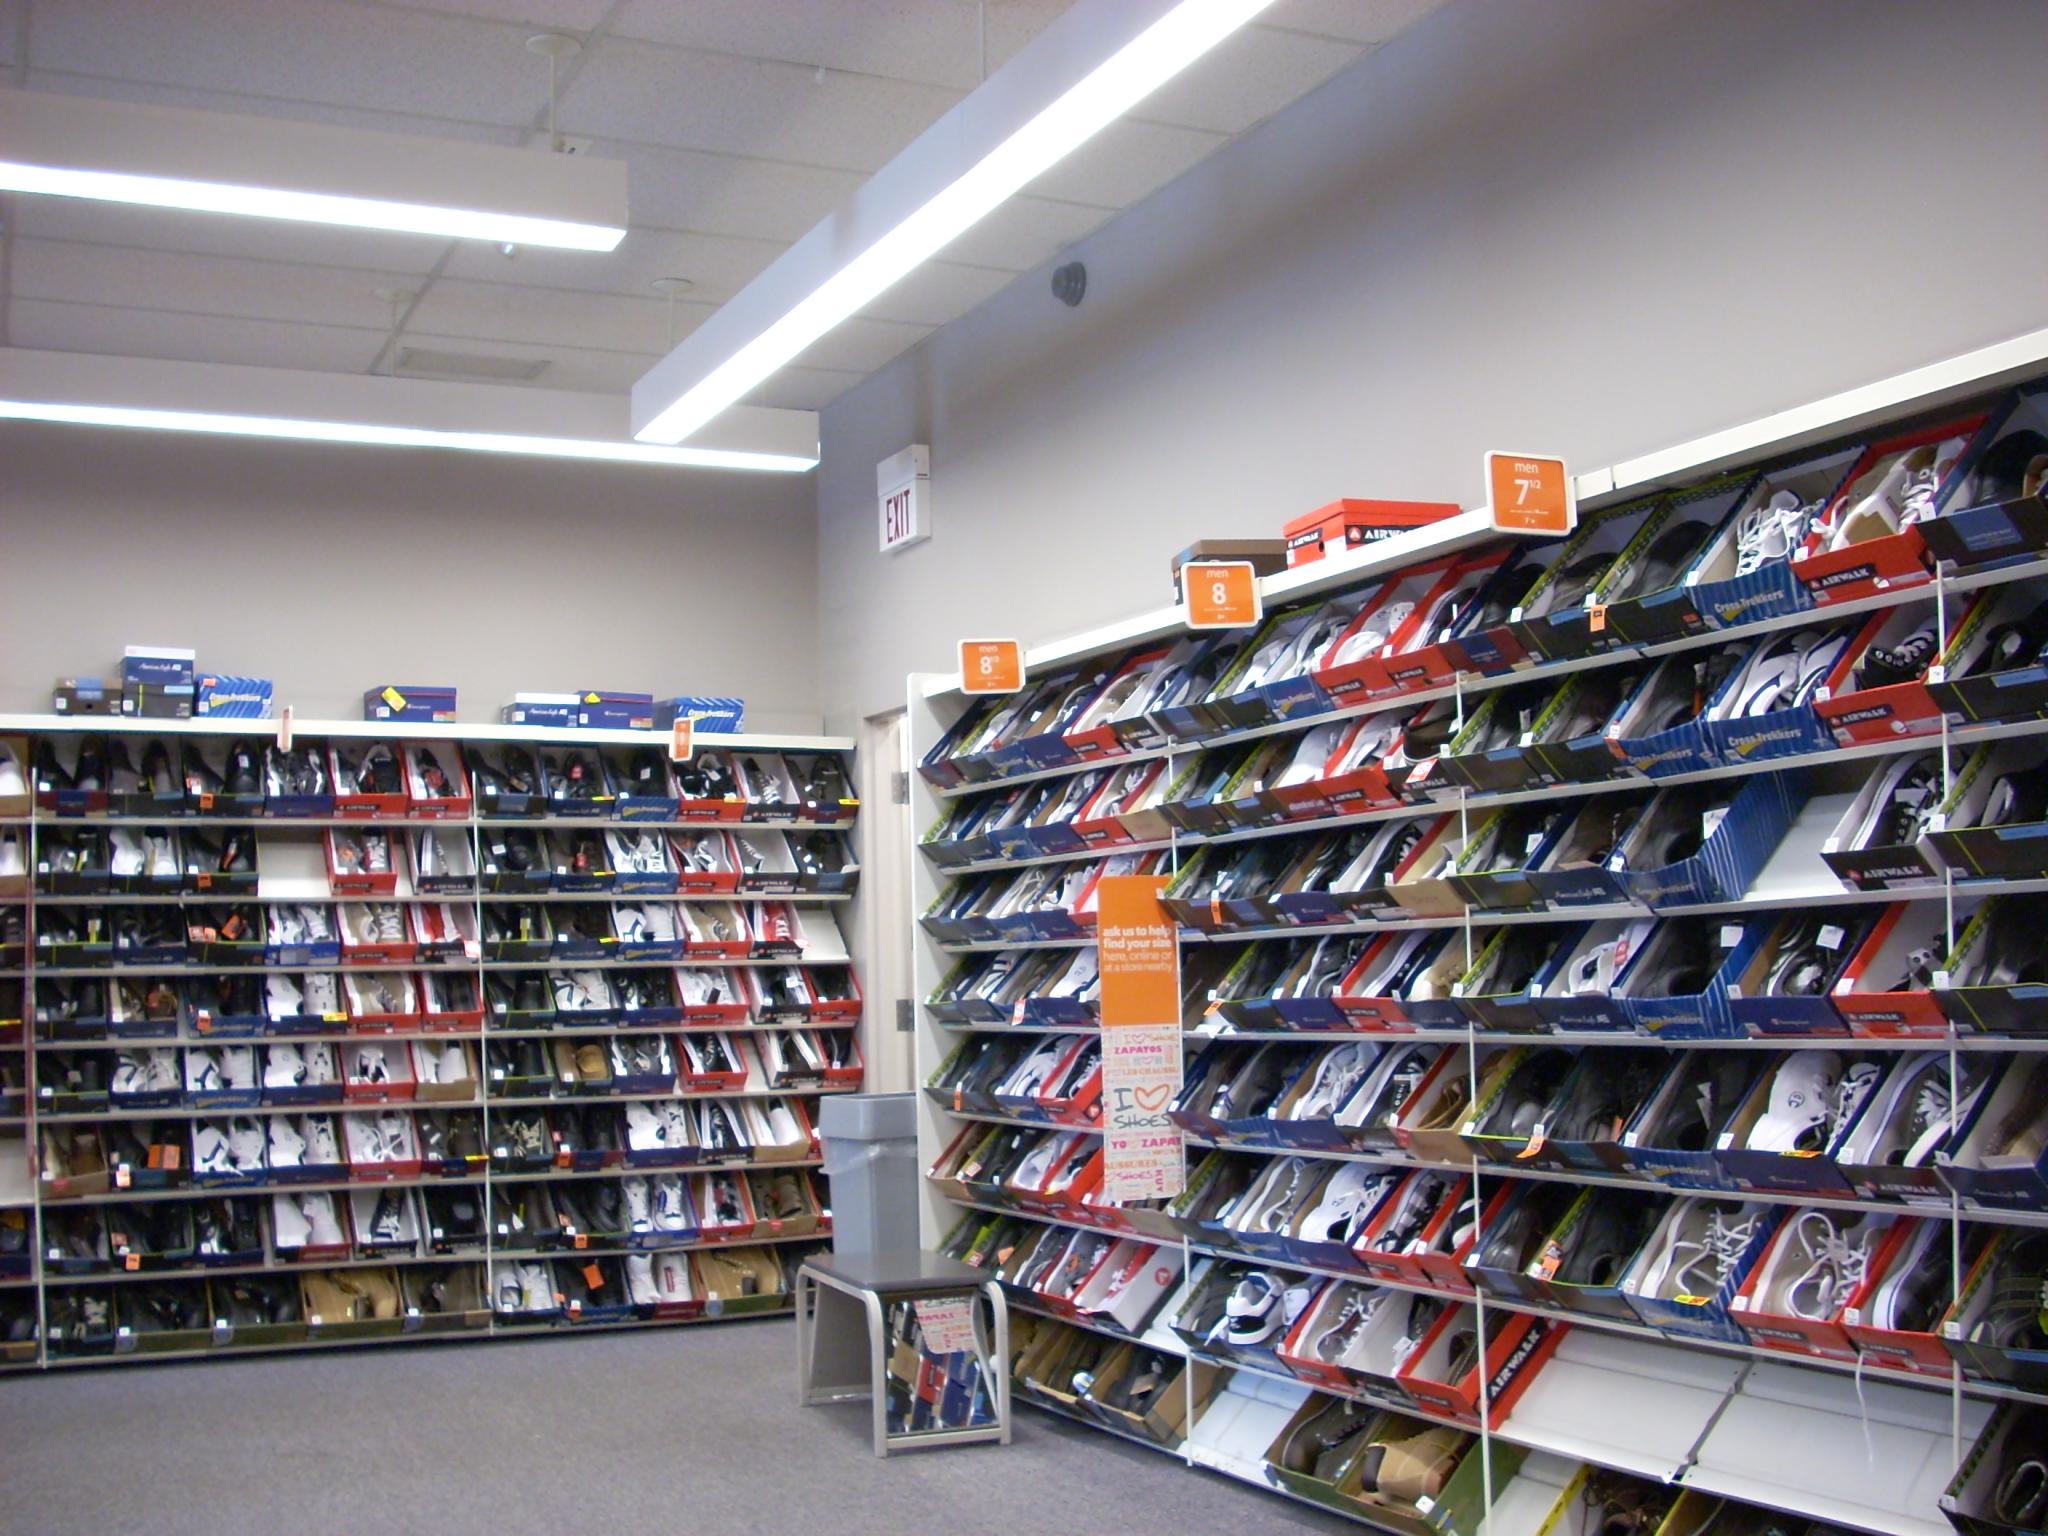 Payless ShoeSource interior | Flickr - Photo Sharing!